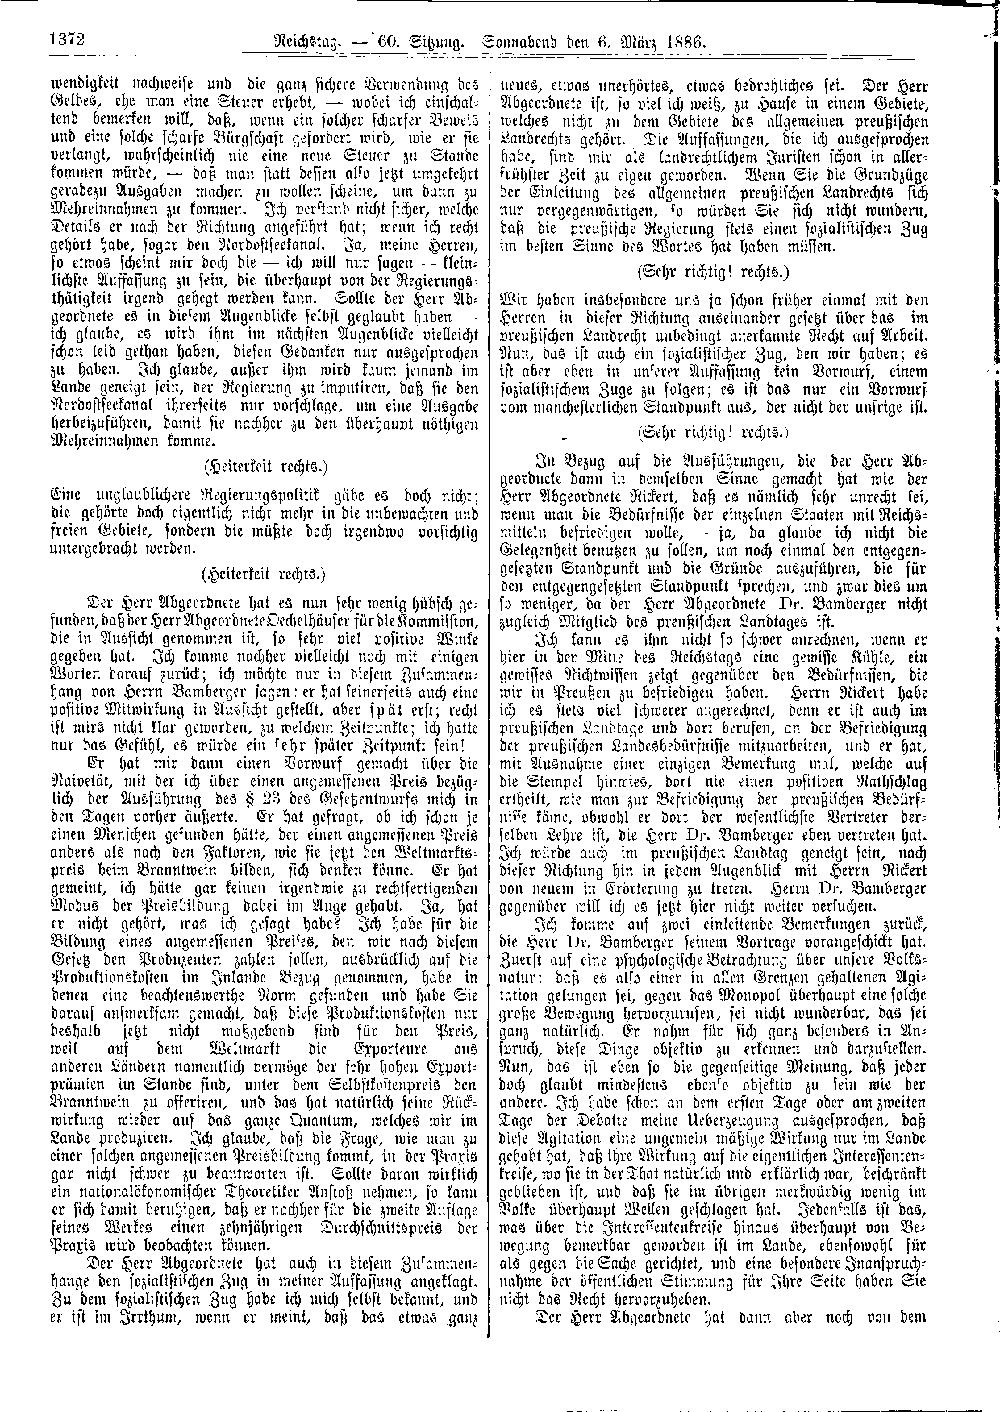 Scan of page 1372